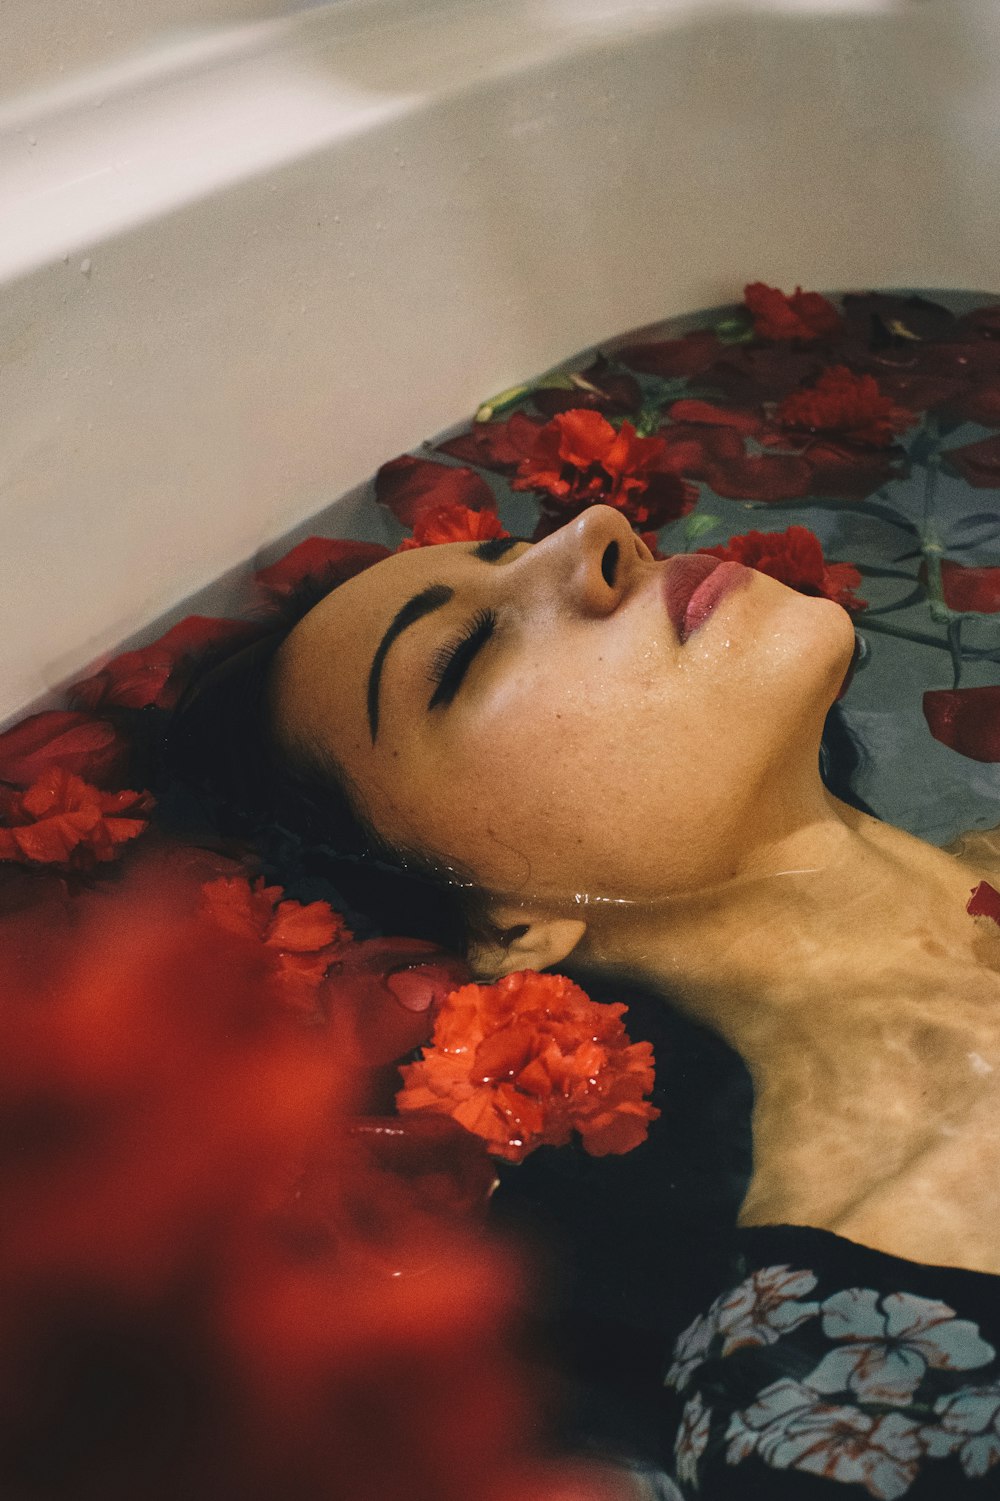 woman in grey and black floral dress submerge into bathtub with red flowers